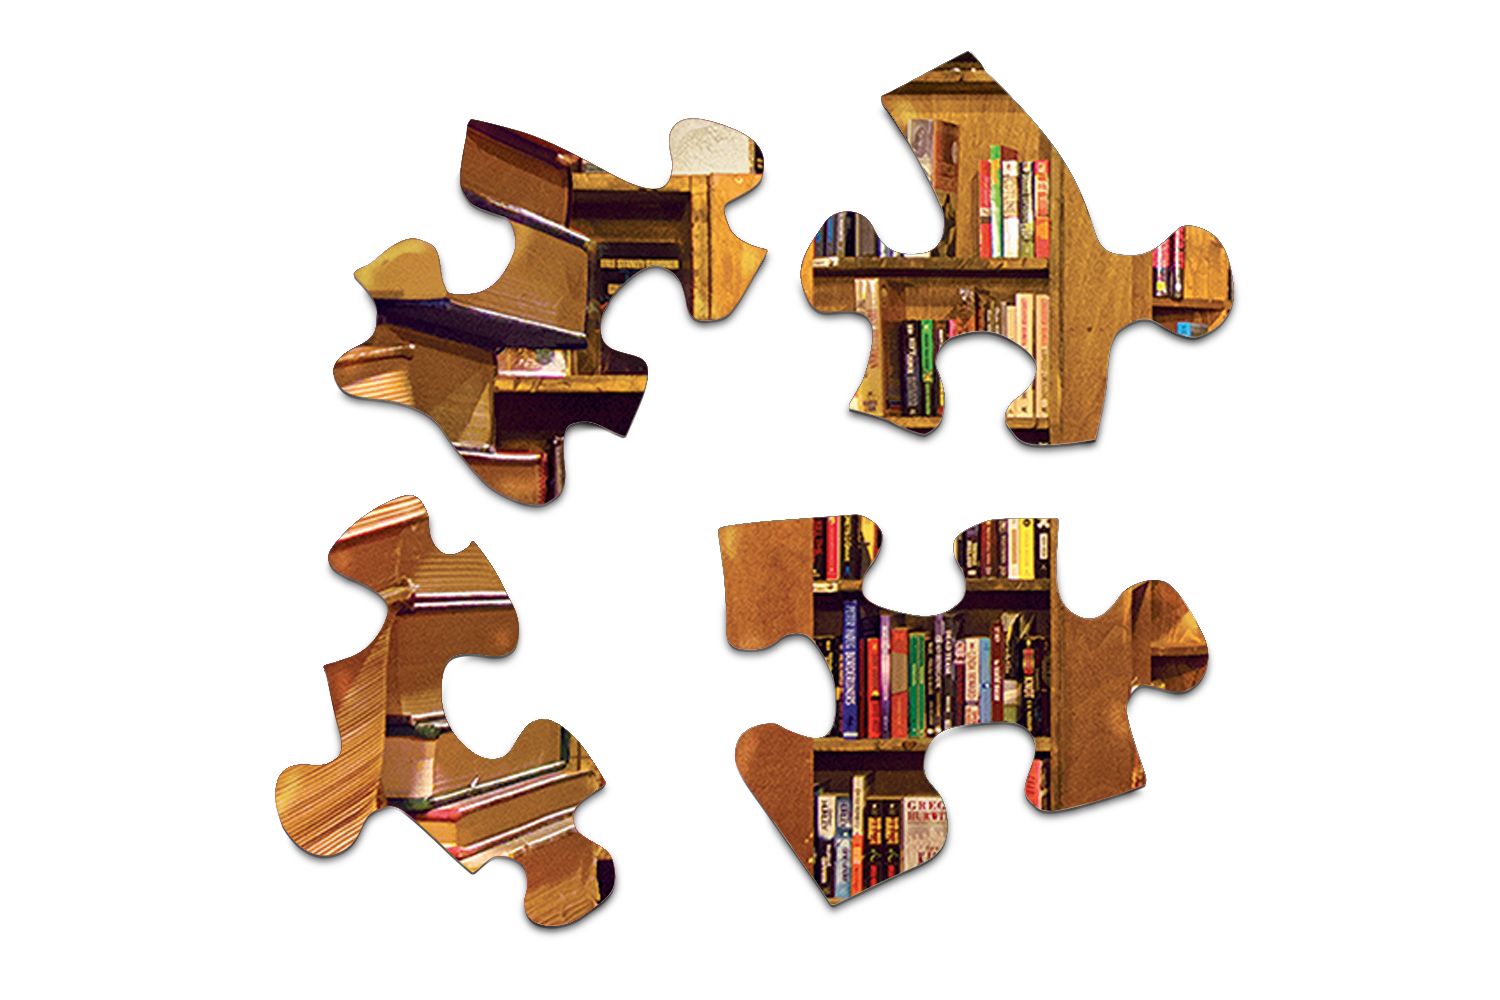 Book Shop 500 Piece Jigsaw Puzzle - image 4 of 6